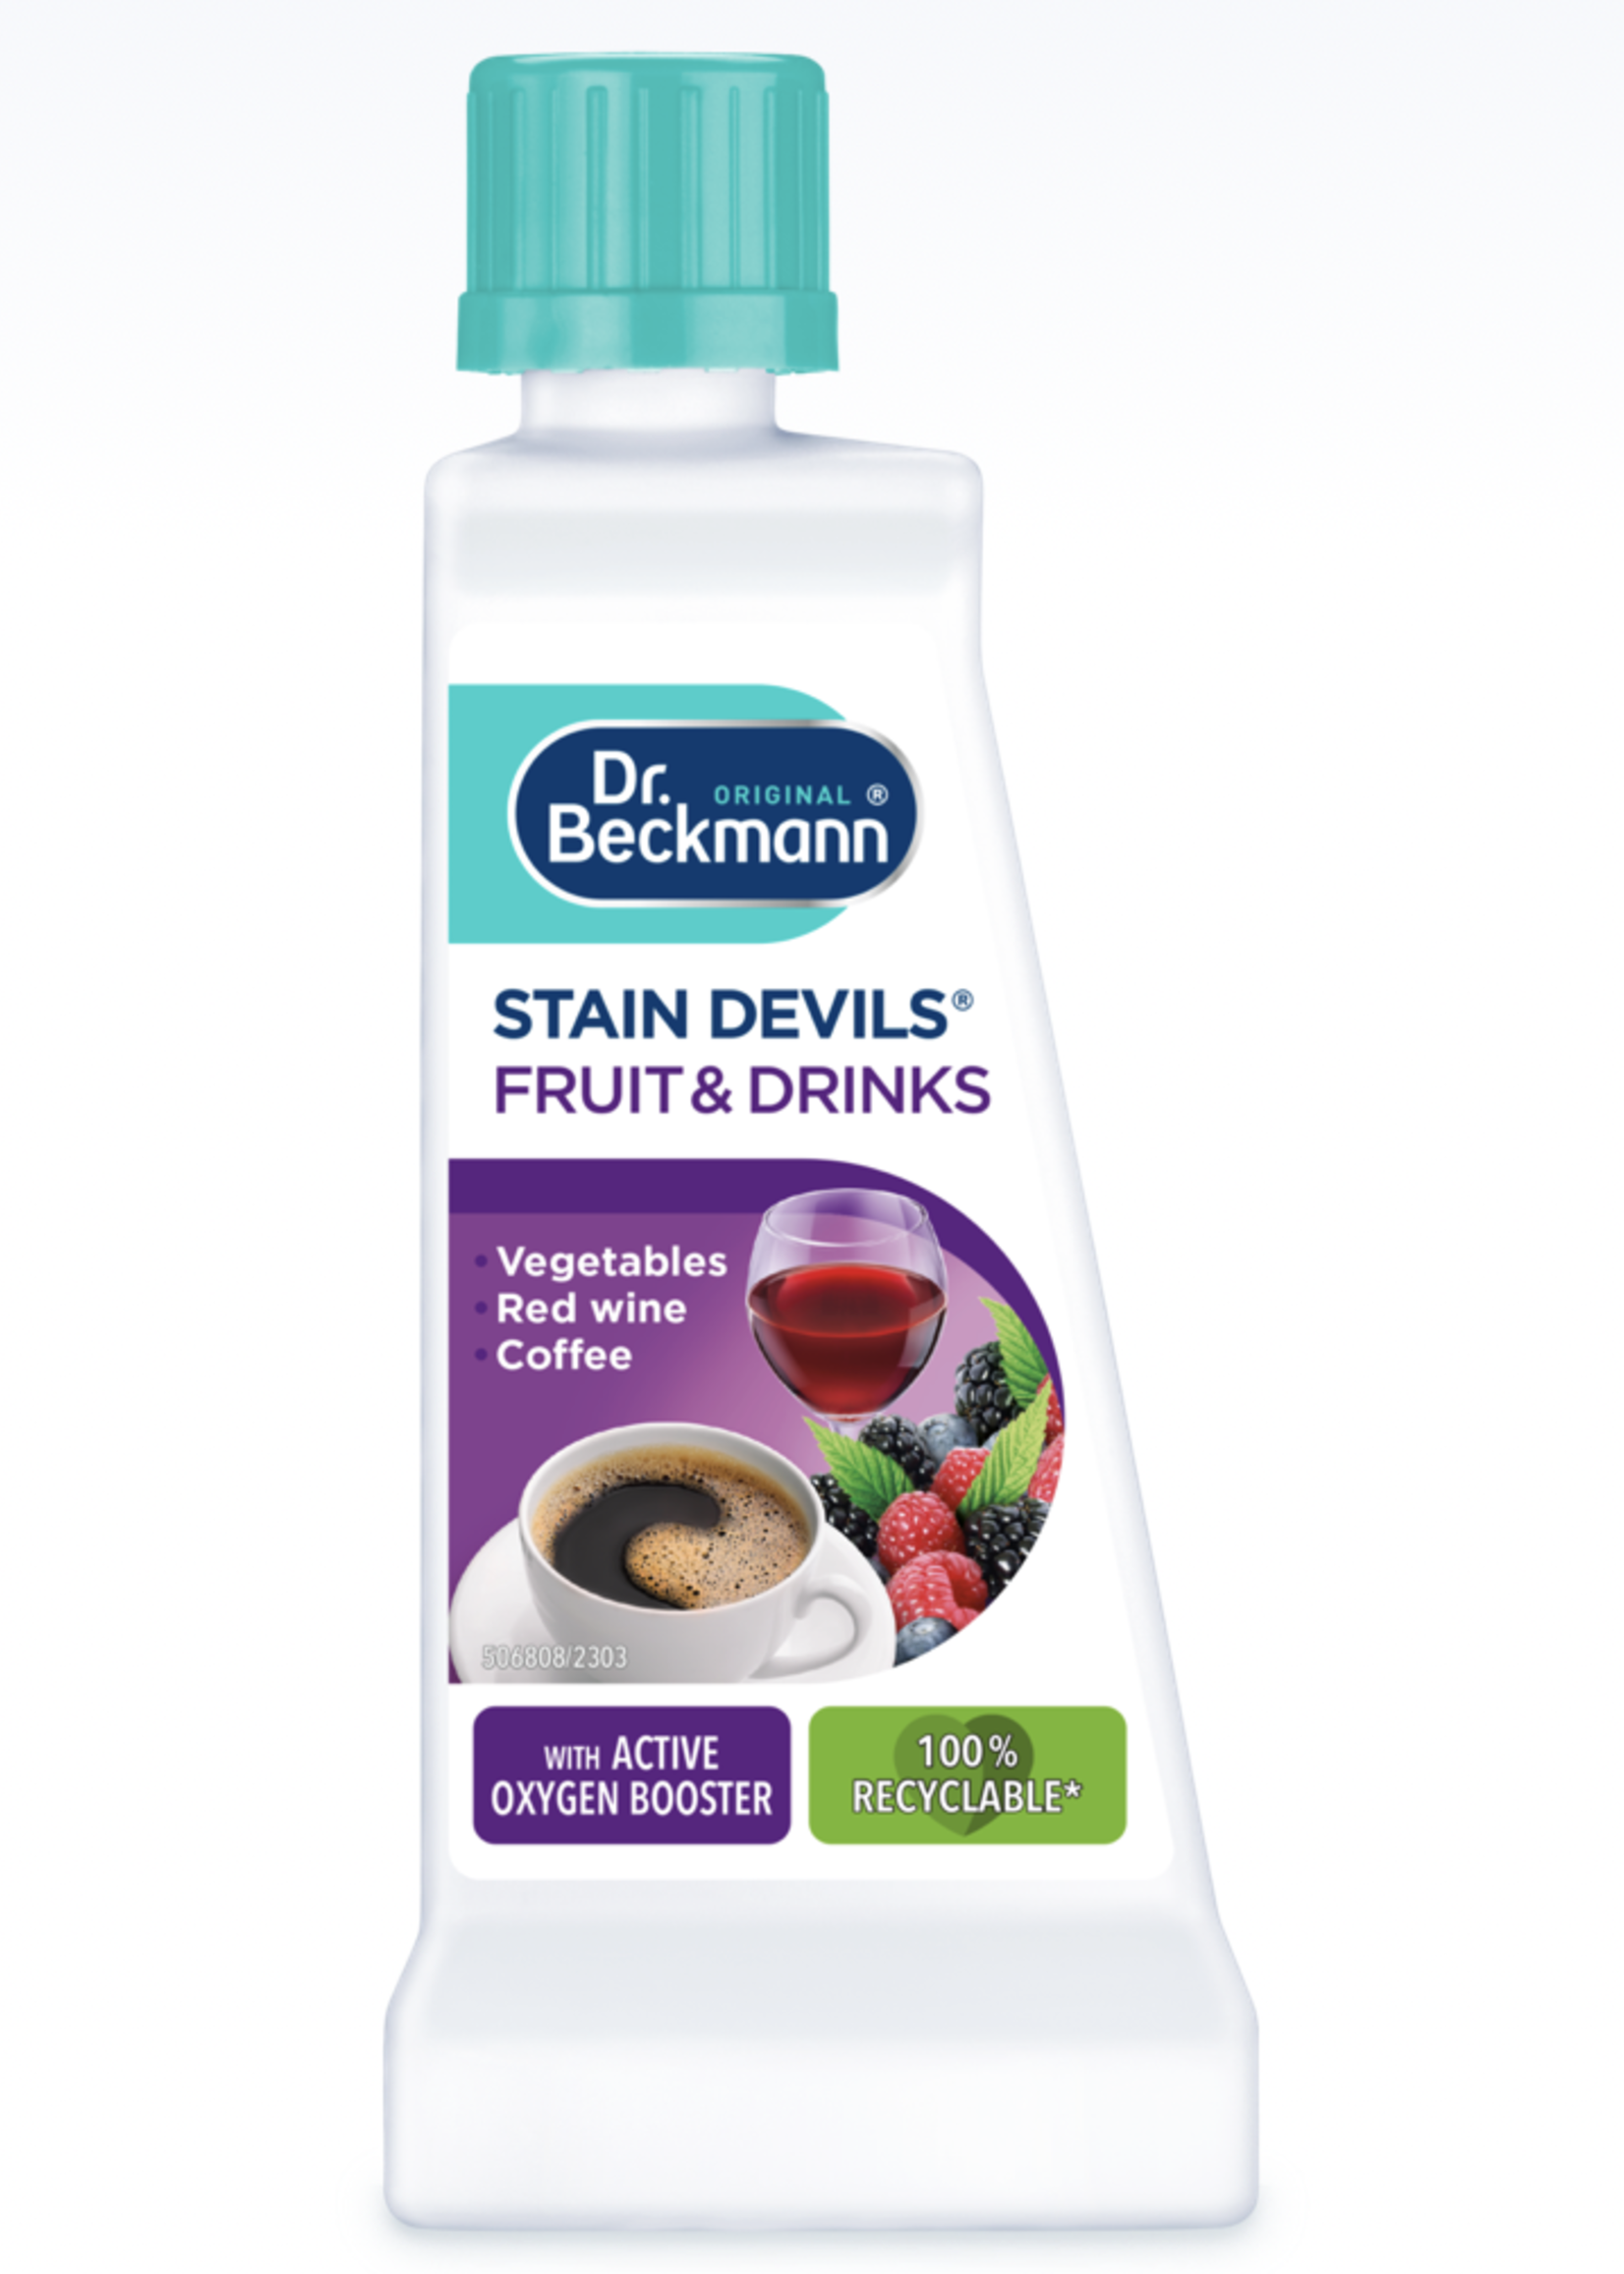 Dr Beckmann Stain Devils Fruit and Drink - Vegetables, red whine and coffee 50ml